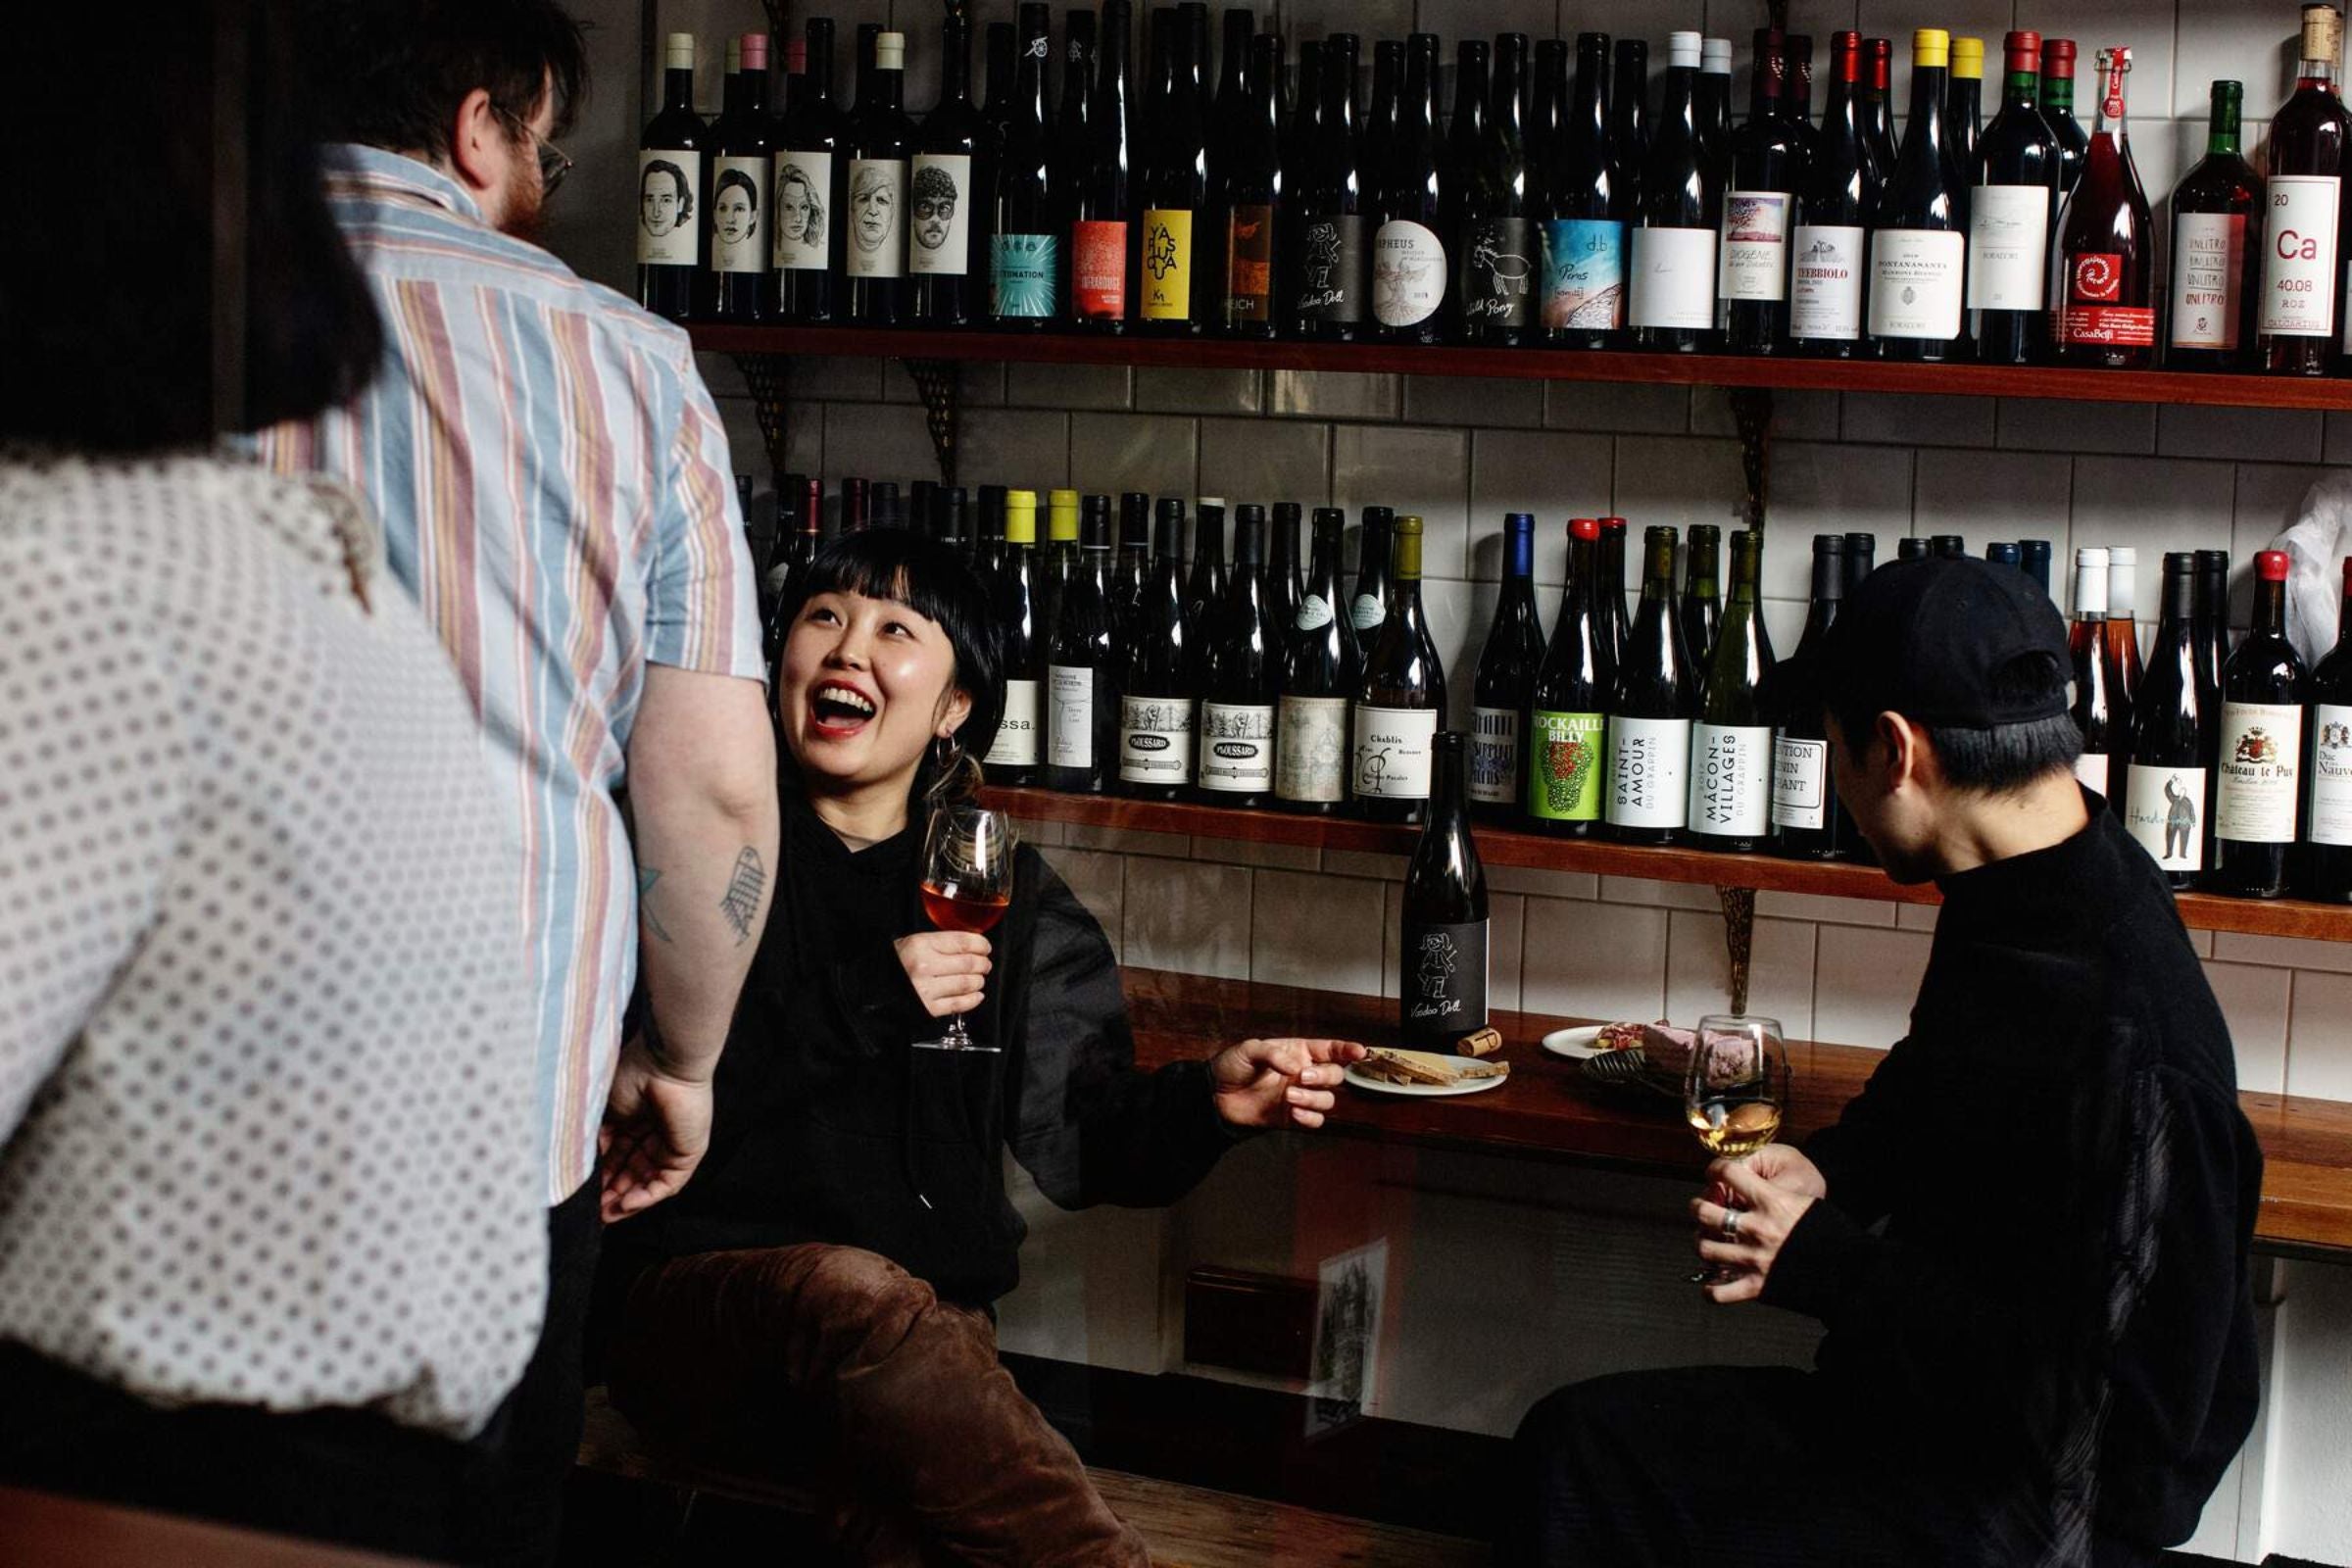 Woman holding a glass of wine laughing at a man passing her. There is two shelves of different wine bottles behind her on display.